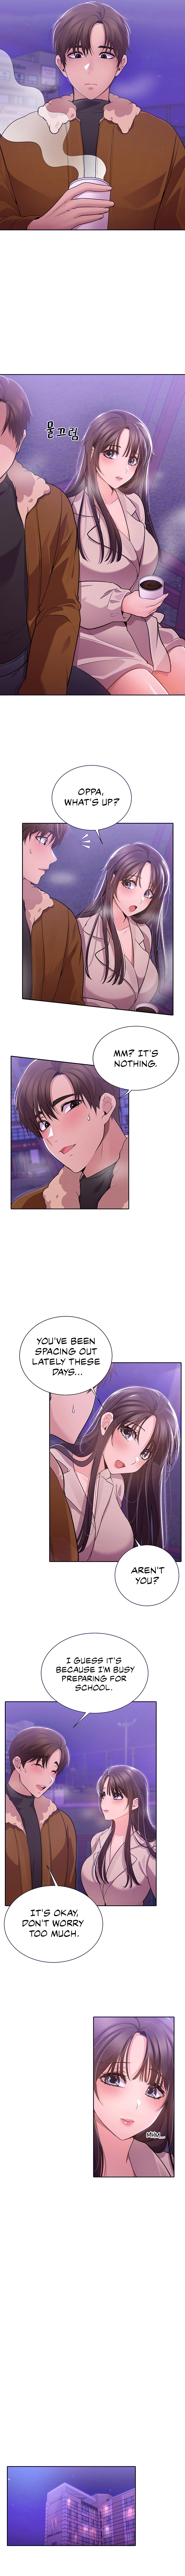 Meeting You Again - Page 2